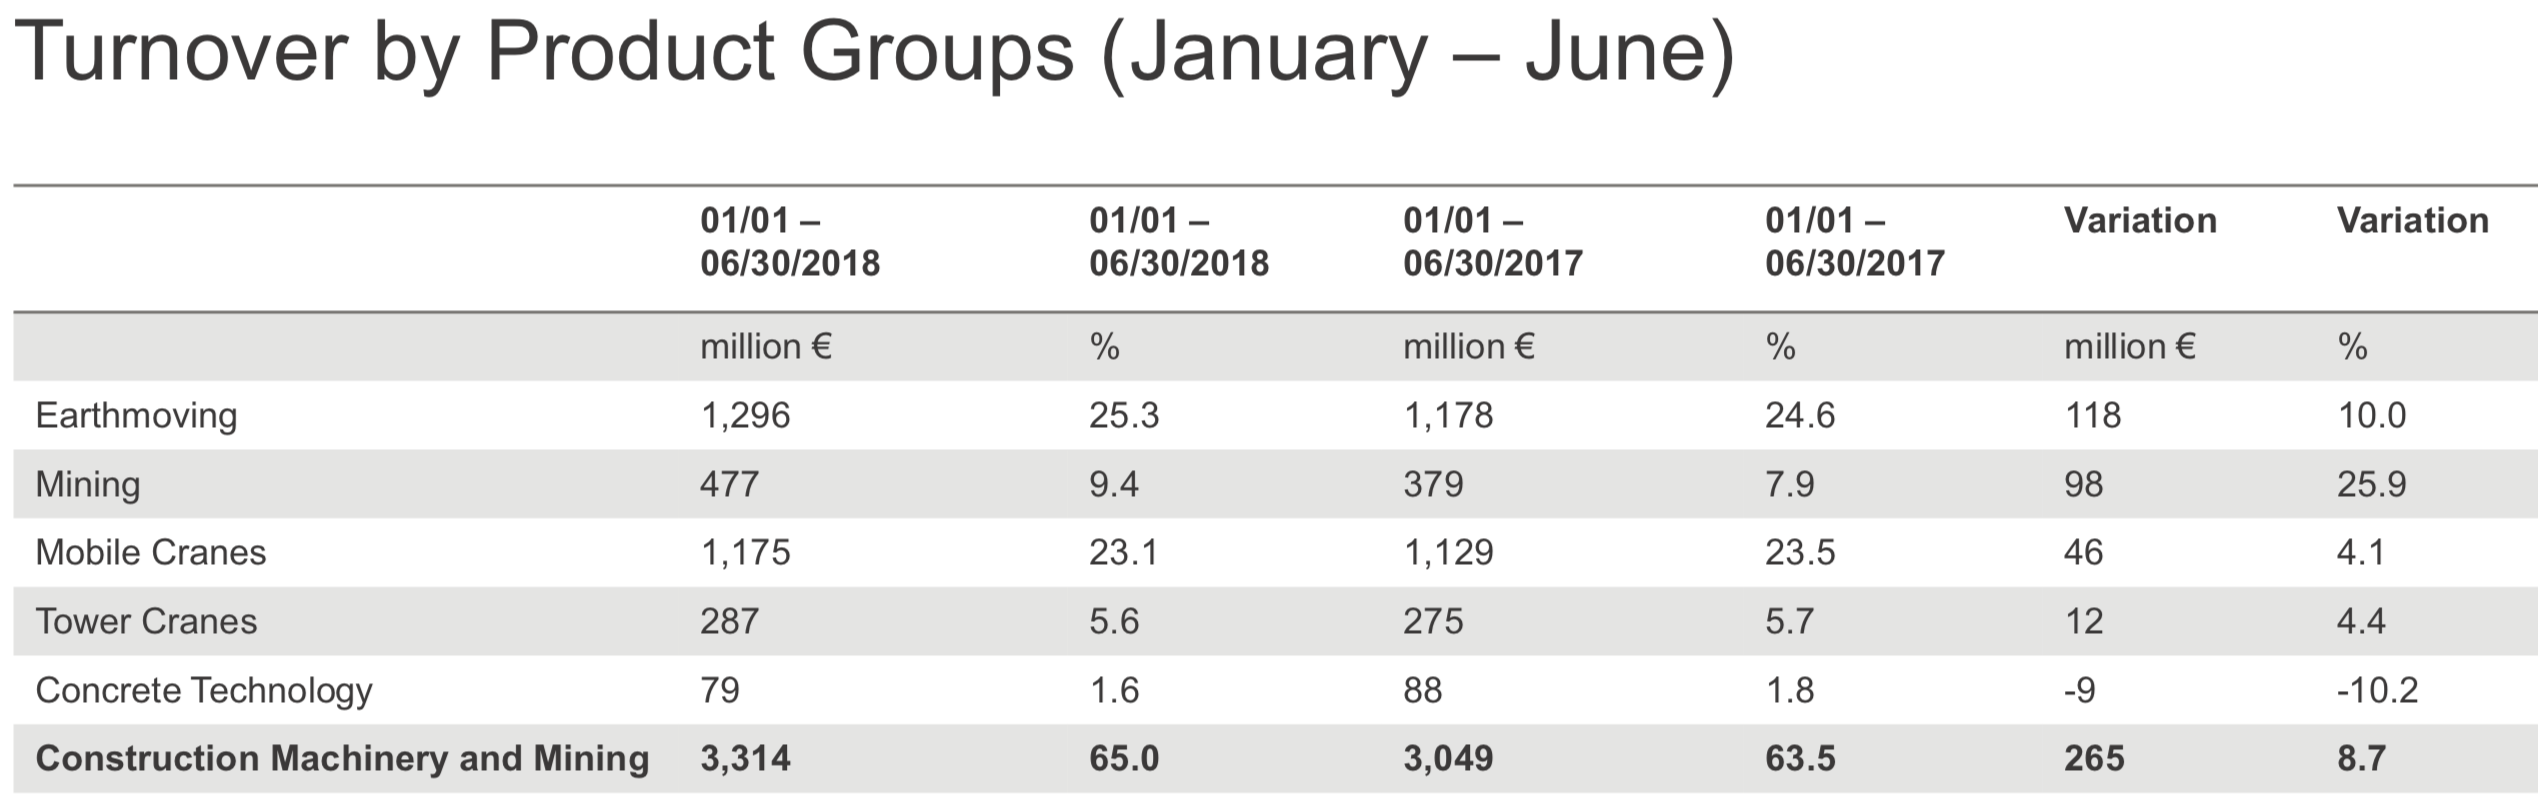 Turnover by product groups chart for January - June